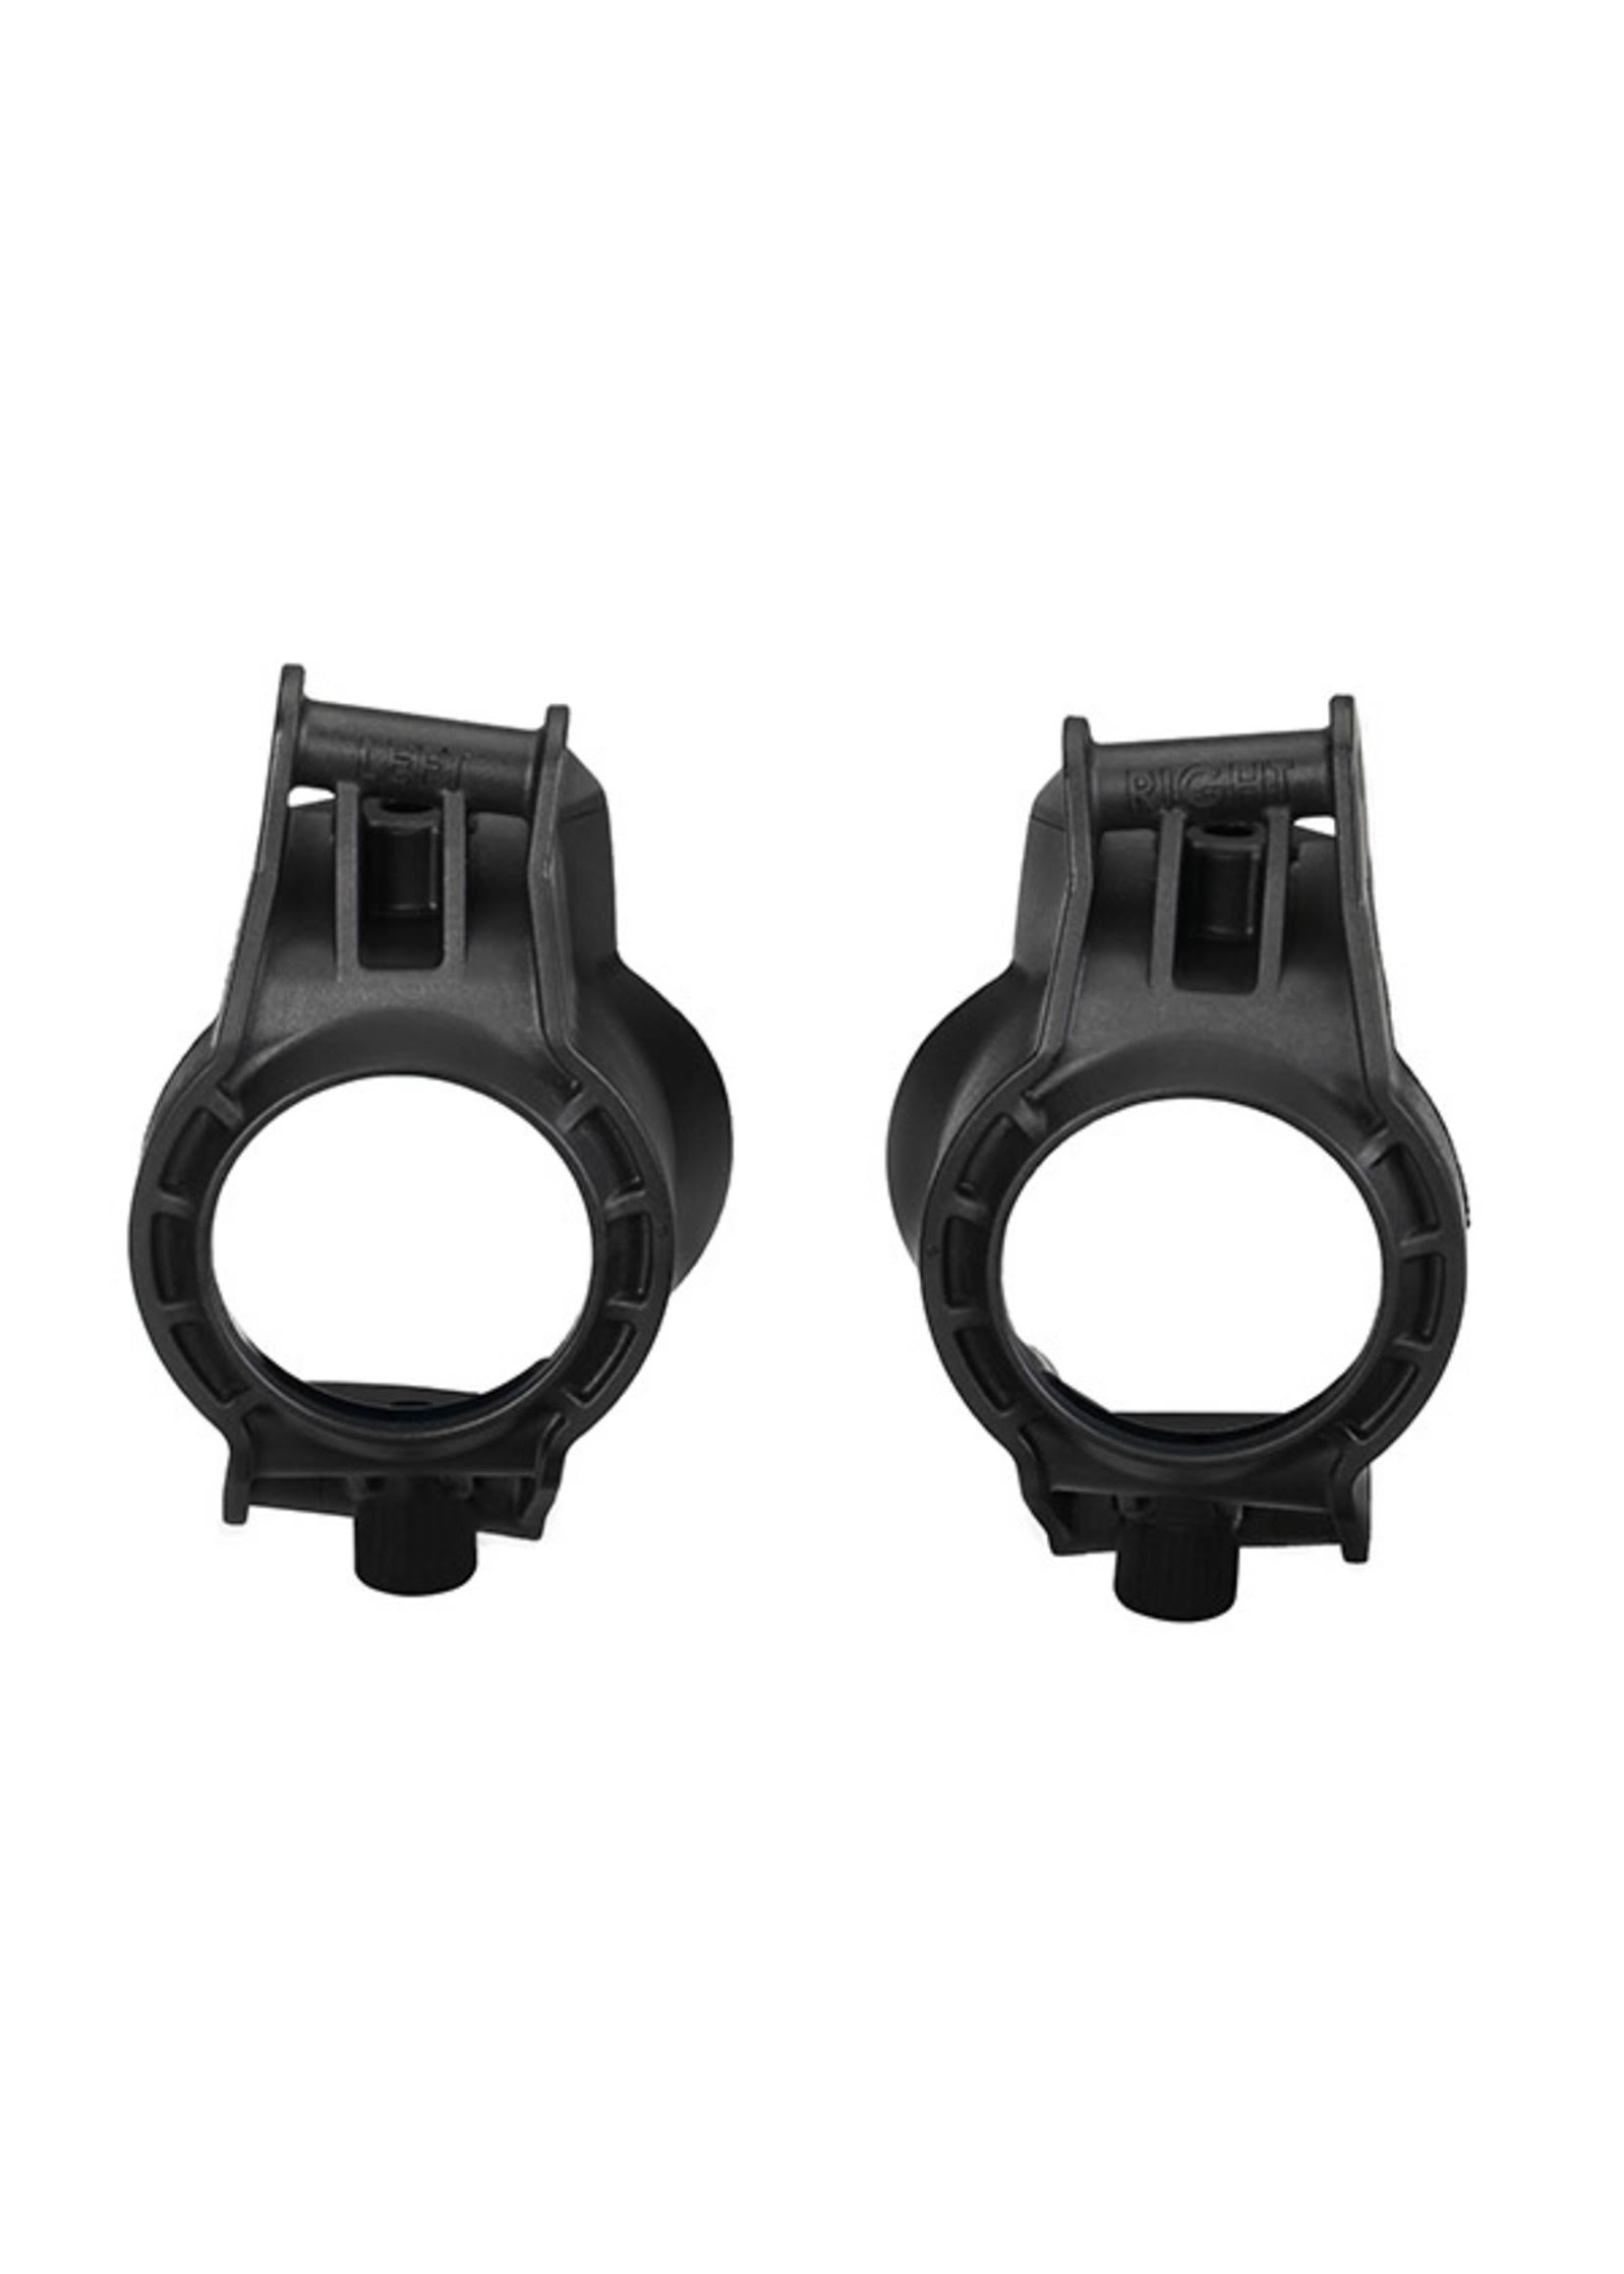 Traxxas RC Vehicle Caster Blocks - C Hubs, Left and Right